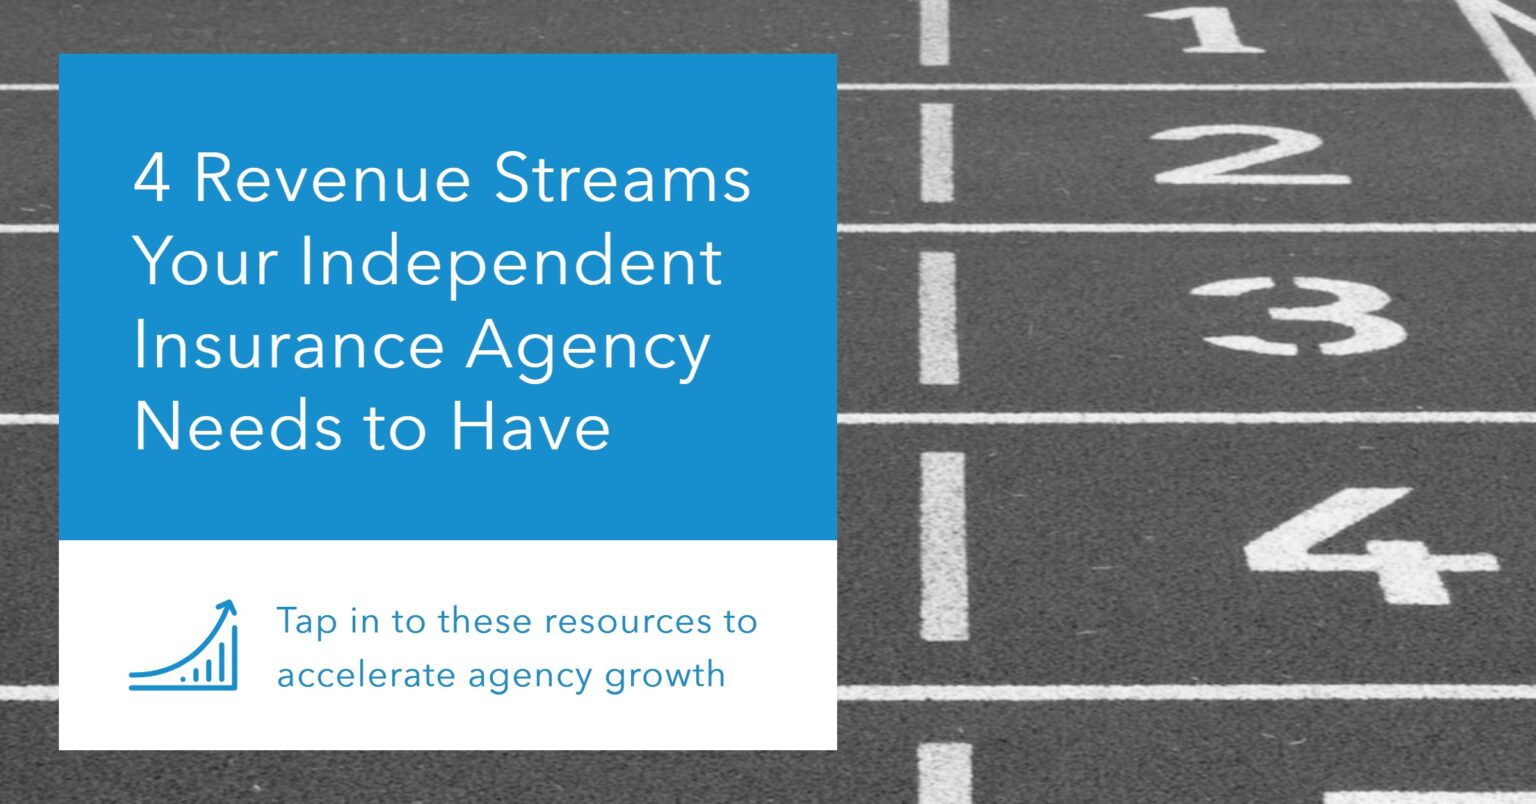 The 4 Revenue Streams That Every Independent Insurance Agency Needs